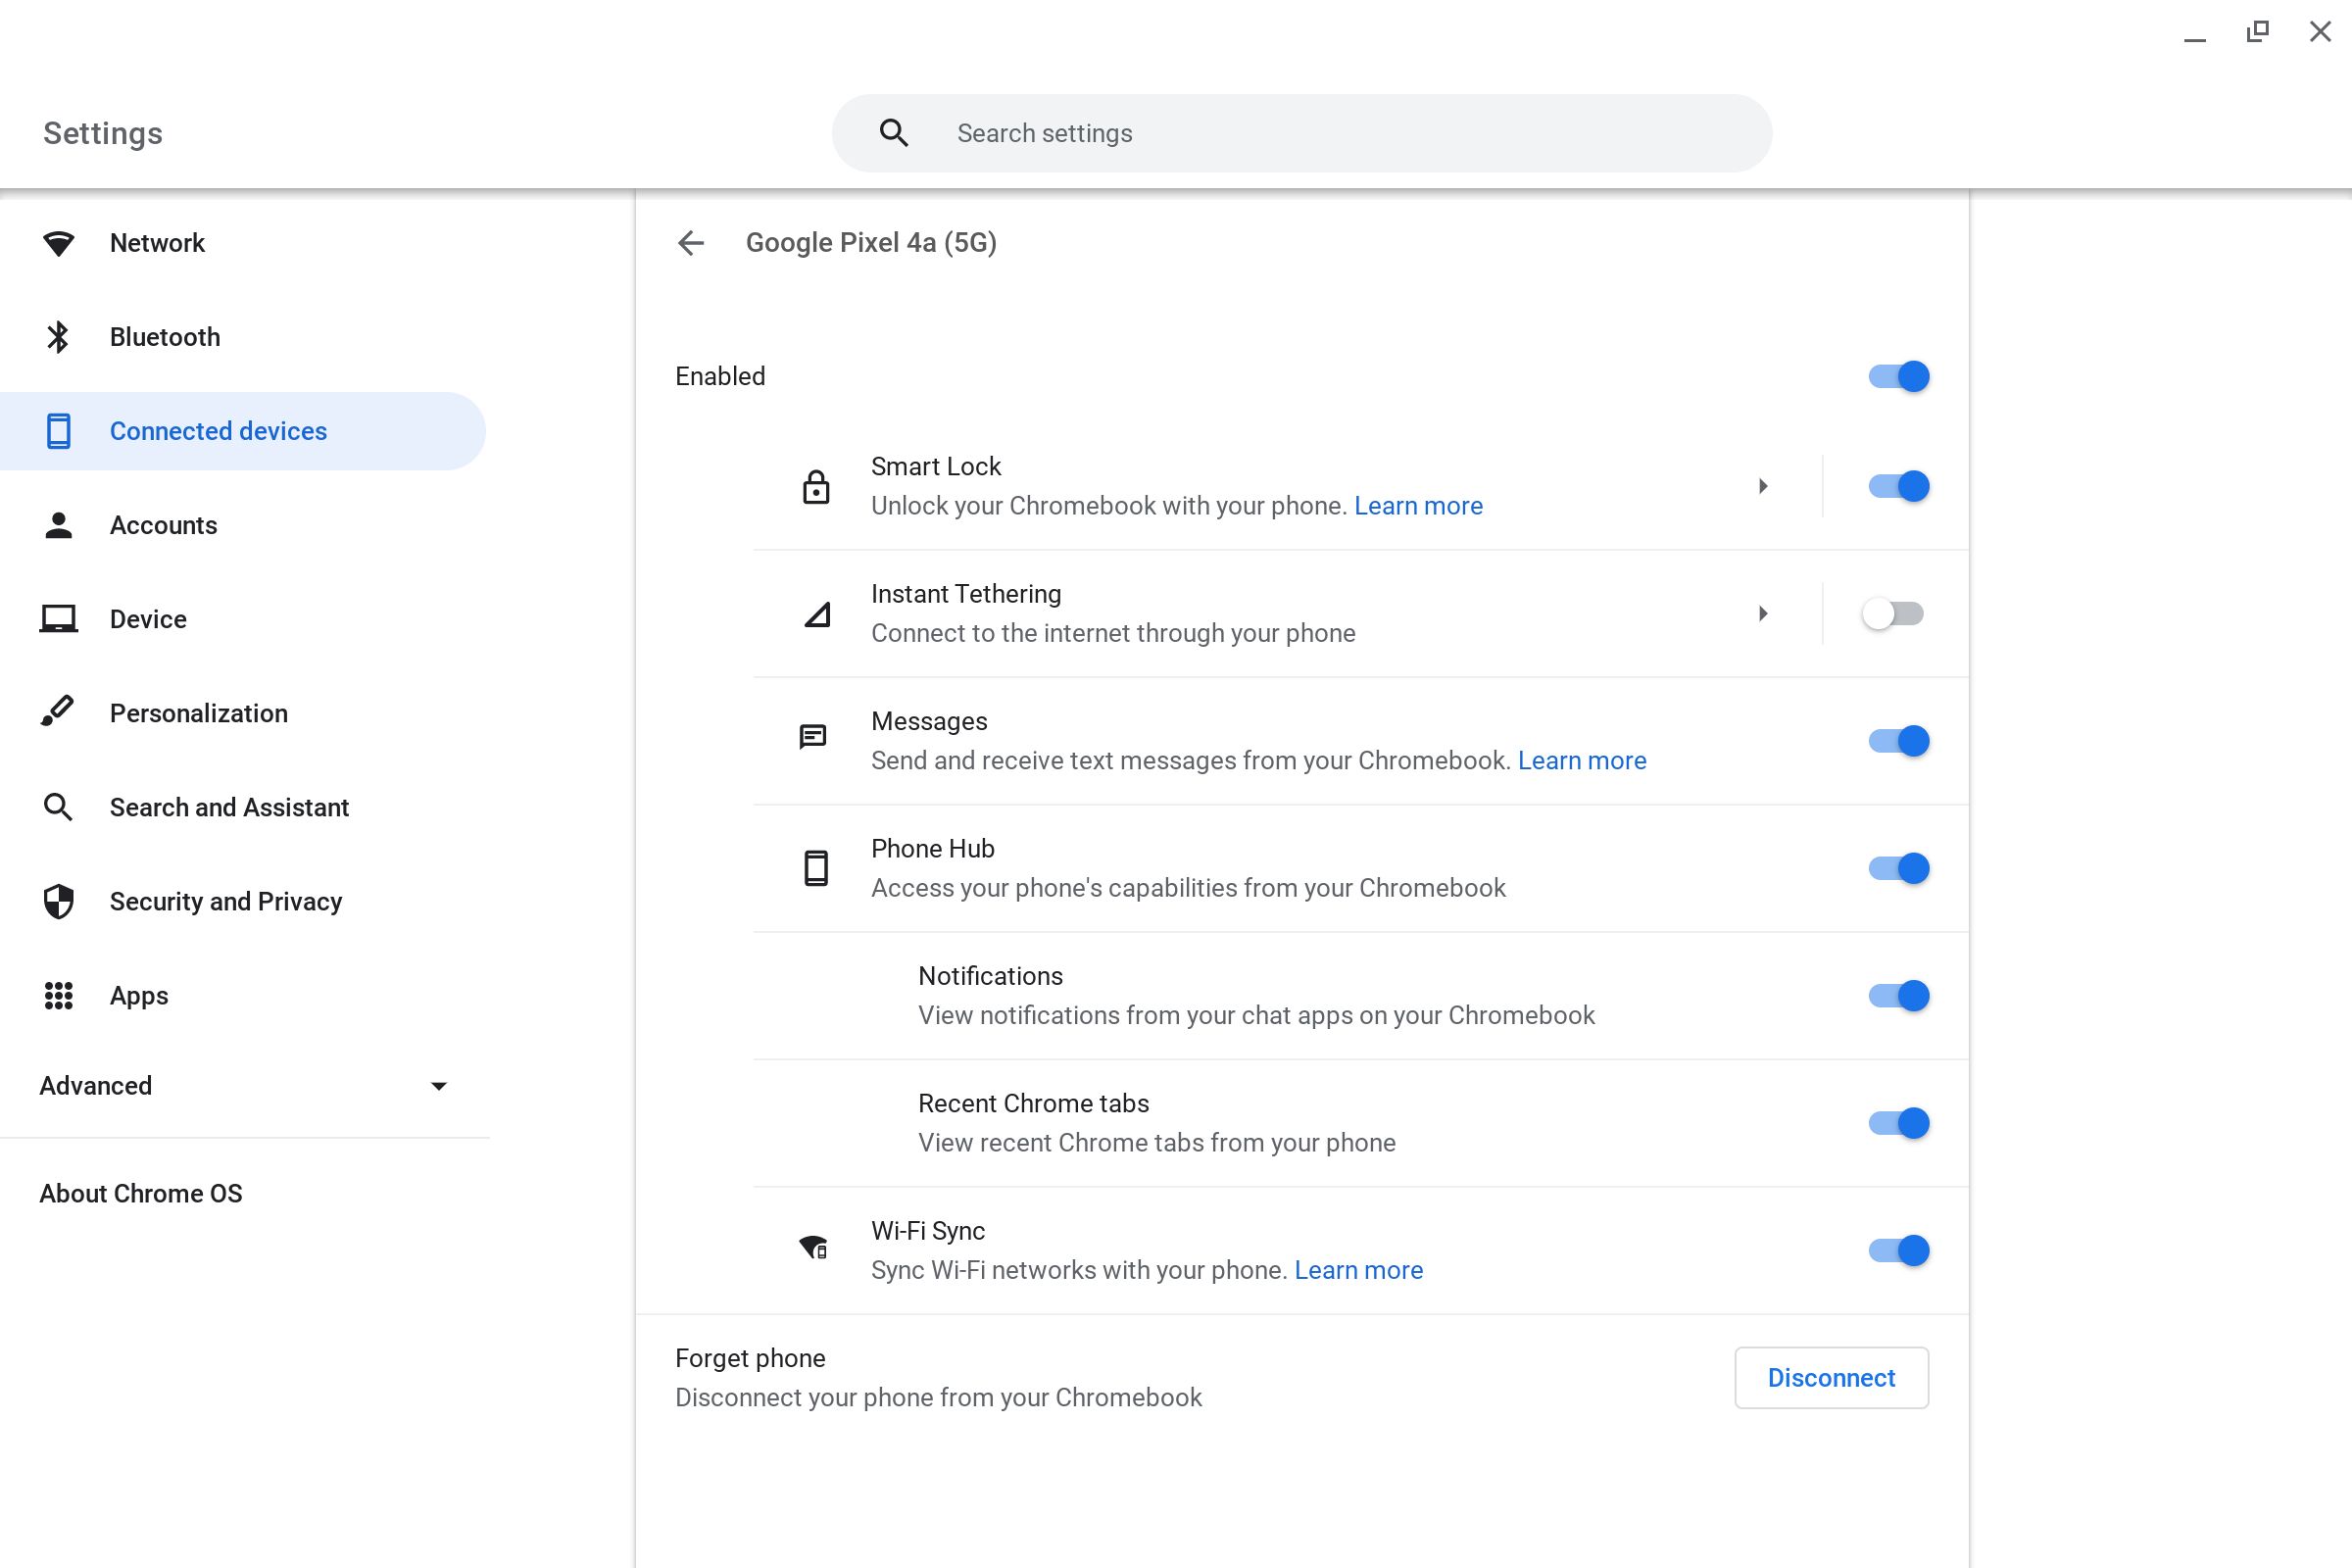 Android phone device settings in the Chromebook Settings app